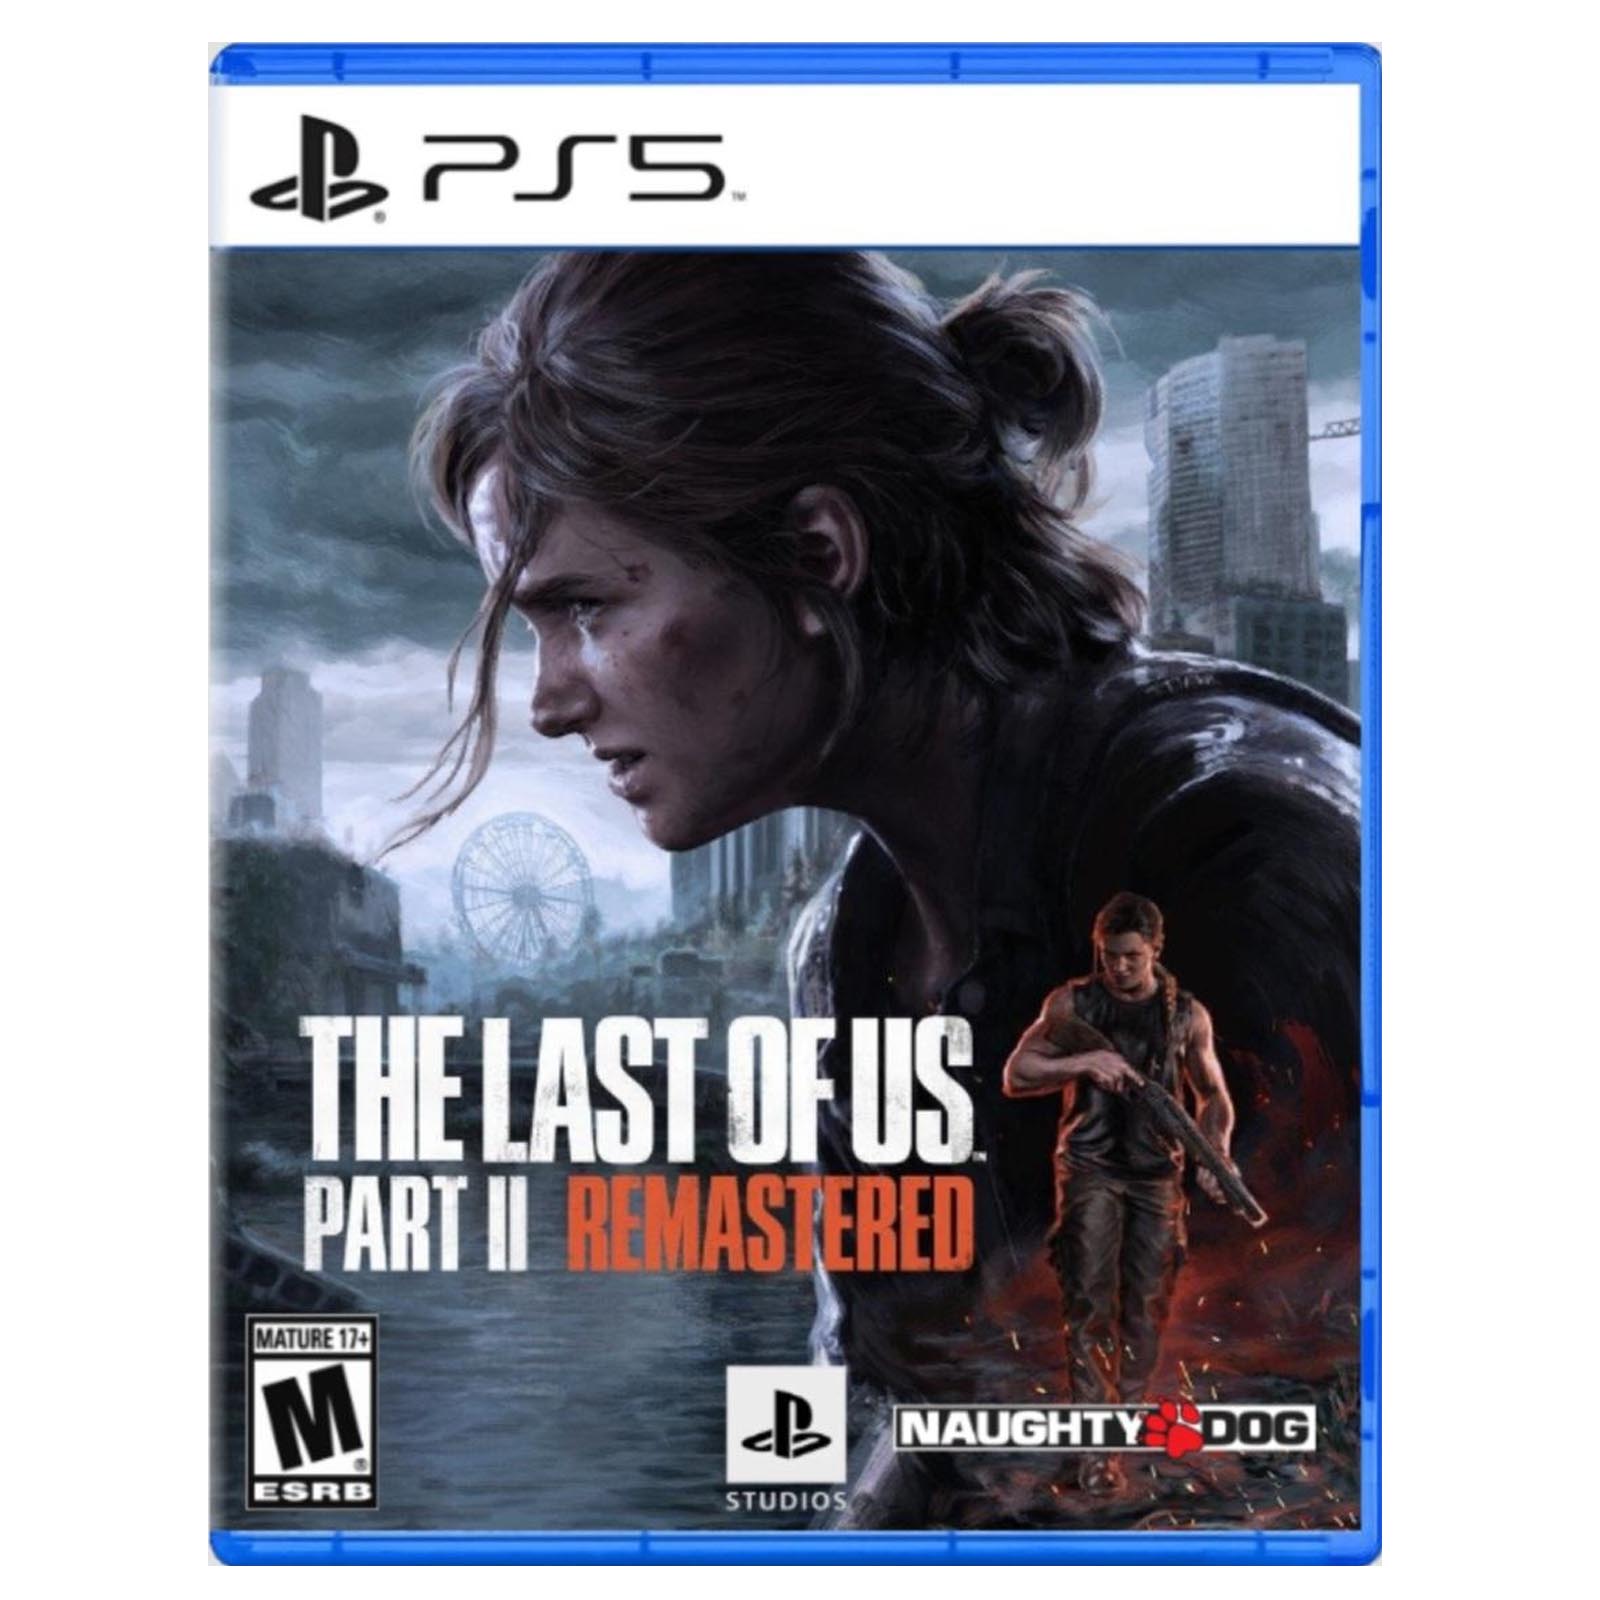 The Last of Us Part II Remastered PS5 Experience Ellie and Abby’s emotional journeys, remastered for PS5. Play the winner of over 300 Game of the Year awards, remastered for the PlayStation®5 console. Relive or play for the first time Ellie and Abby’s story, now with graphical enhancements, new gameplay modes like the roguelike survival experience No Return, full DualSense™ wireless controller integration, and more.. The Last of Us Part II Remastered PS5